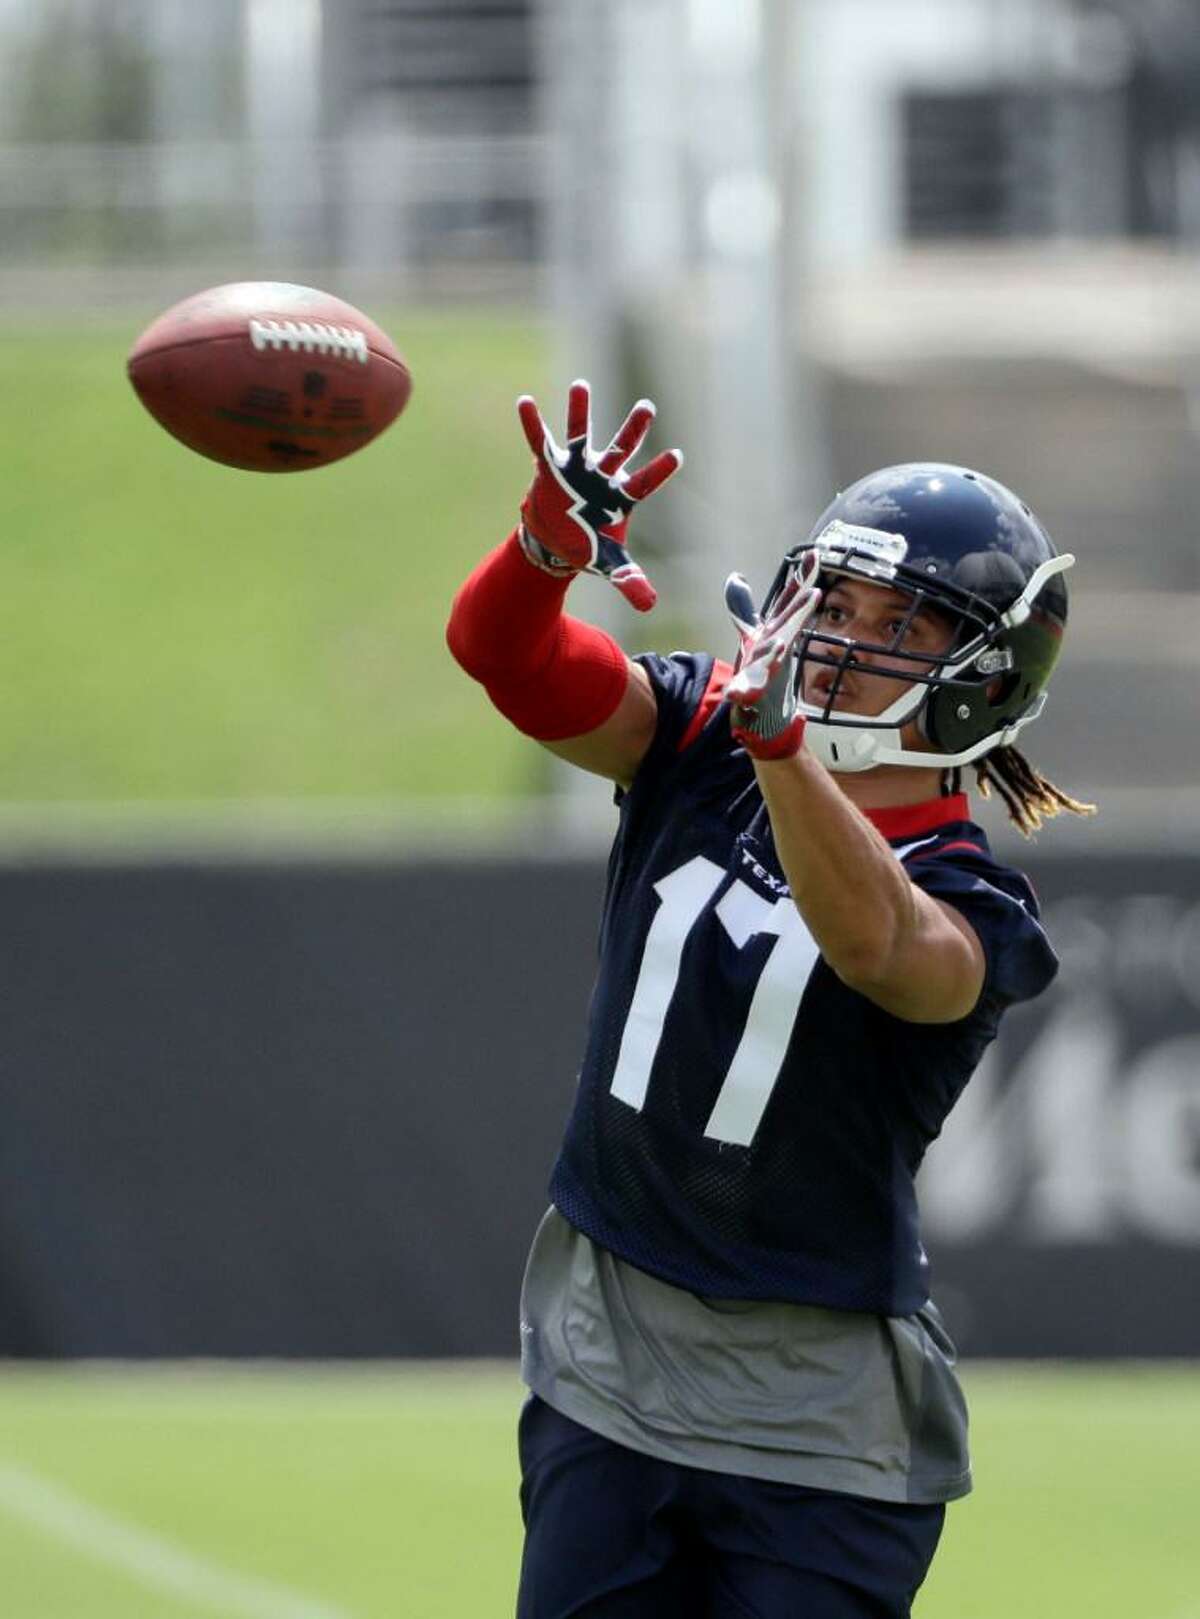 Houston Texans wide receiver Dres Anderson catches a pass during an NFL organized team activities football practice Tuesday, June 6, 2017, in Houston.